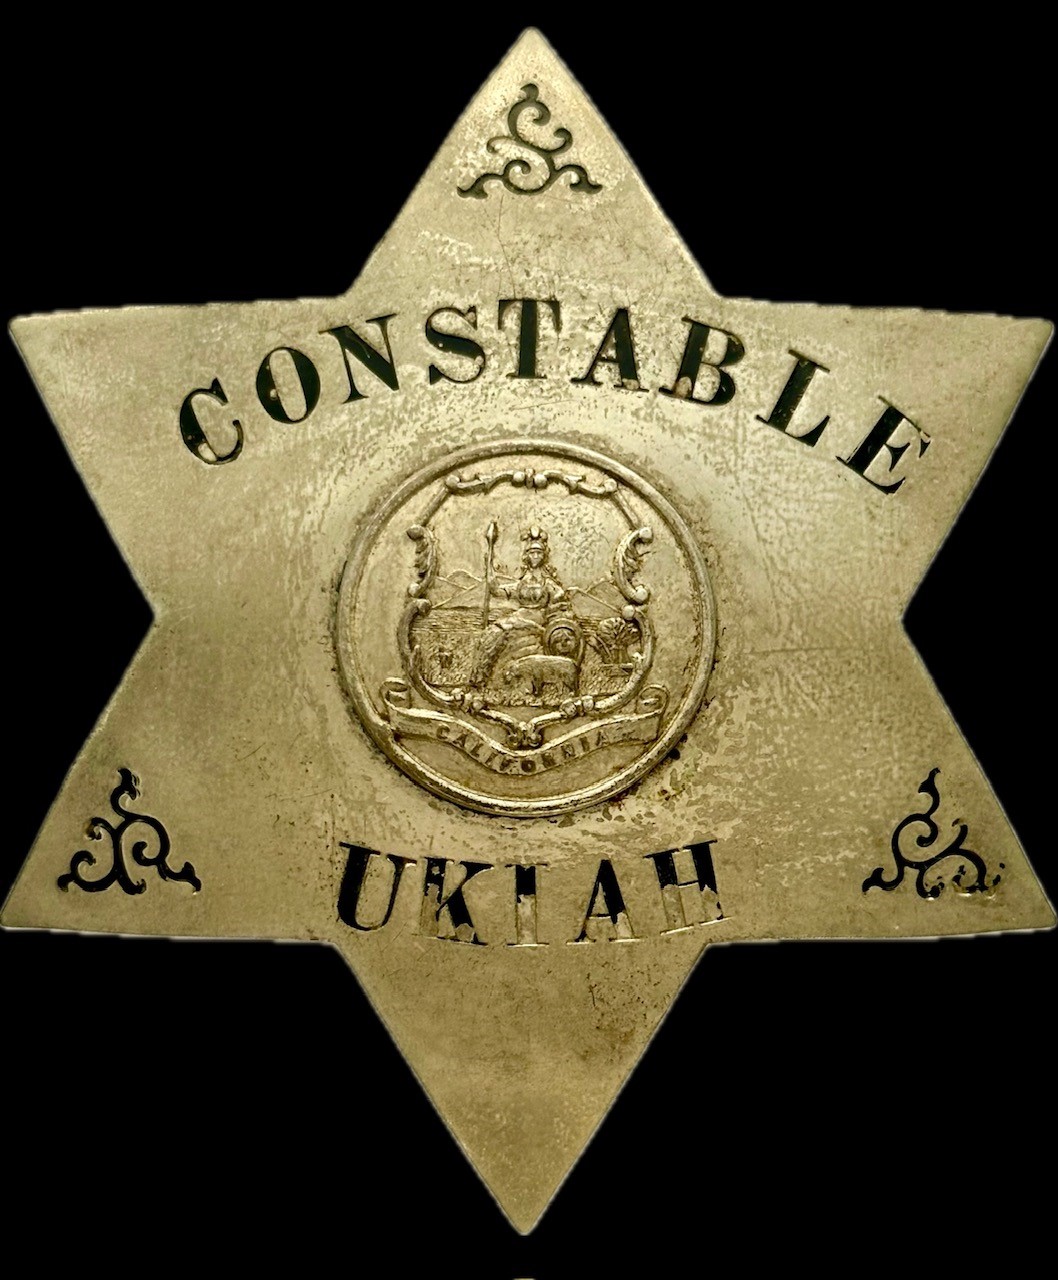 Ukiah Constable badge with old style California state seal.